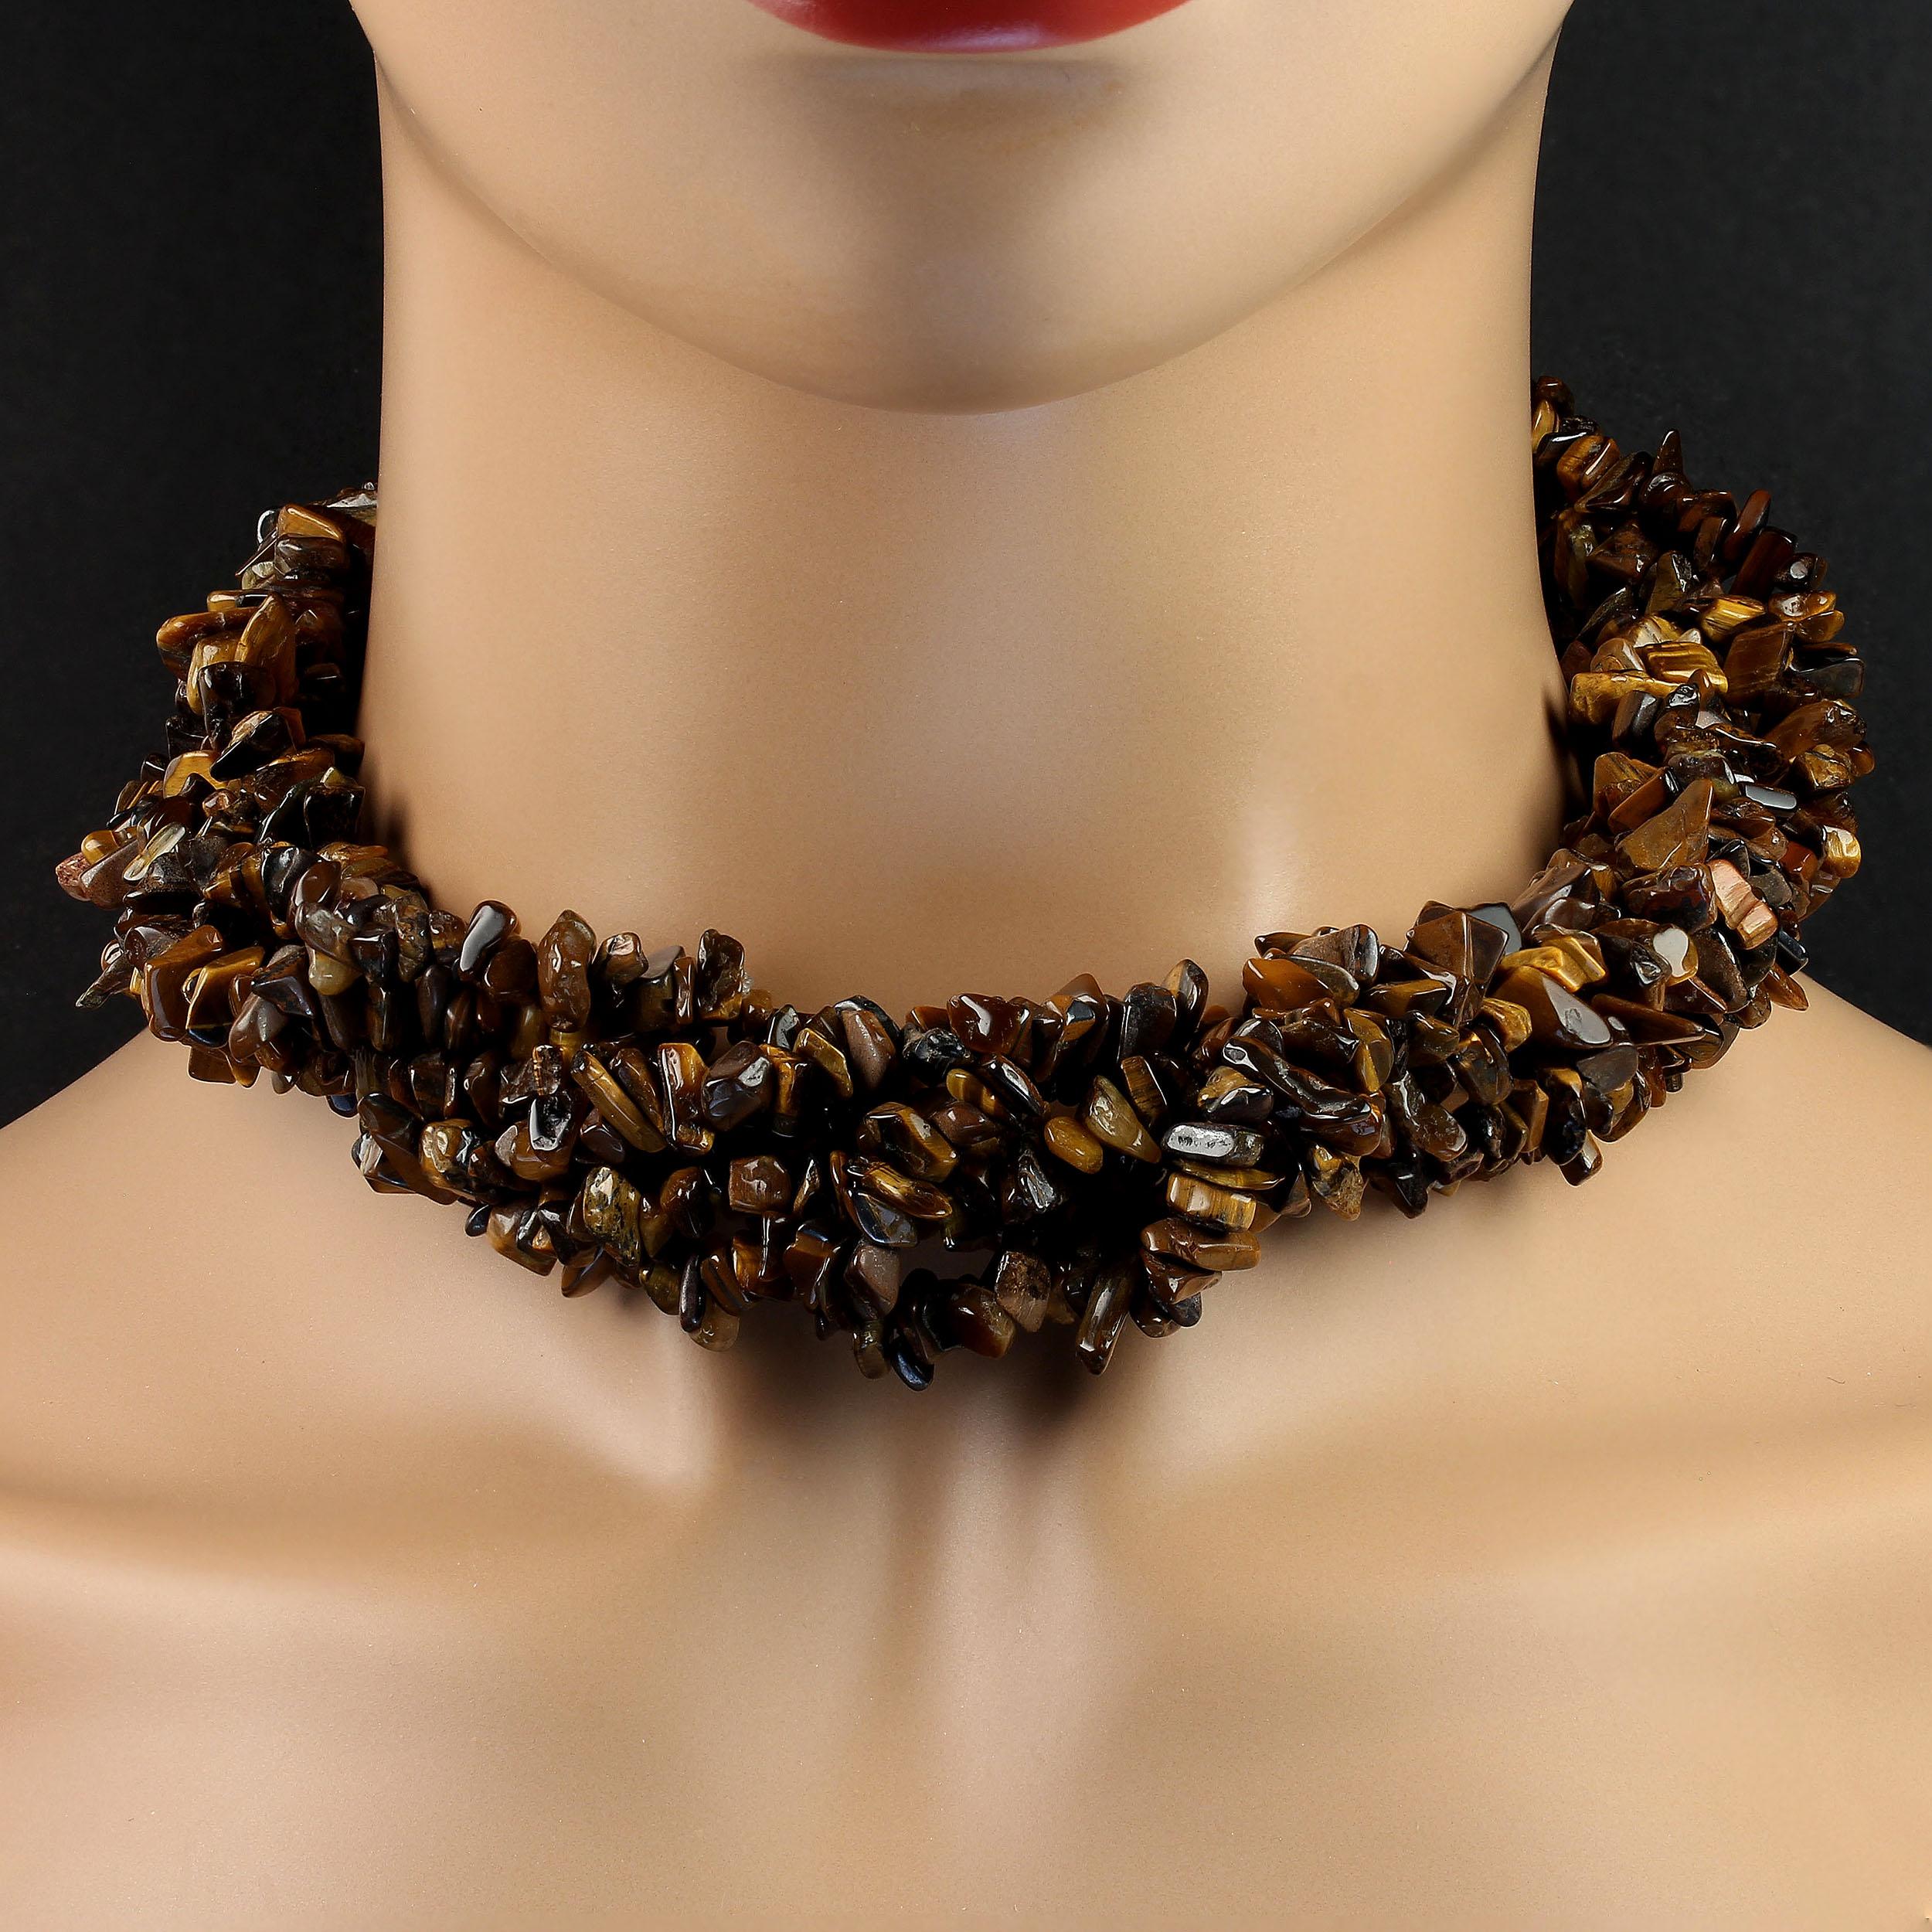 Tumbled AJD Three 36 Inch Infinity Chatoyant Tiger's Eye Necklaces  Great Gift!